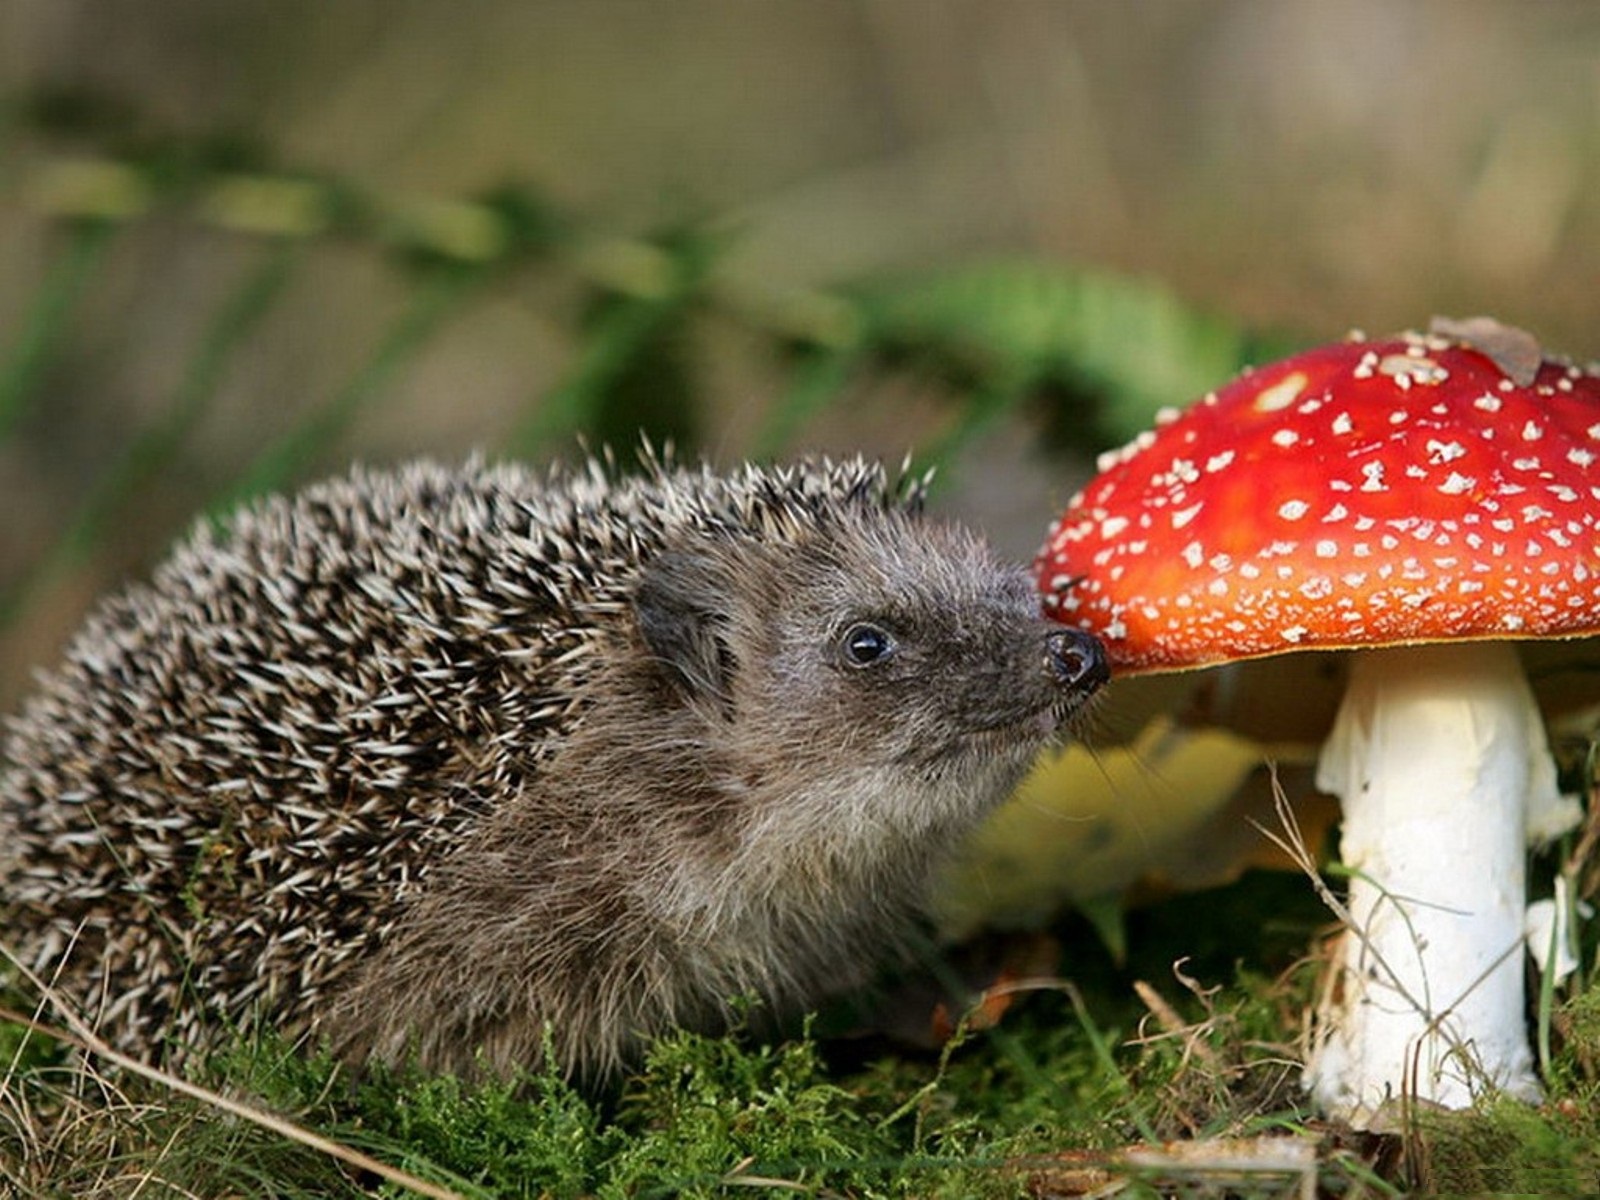 Erugge and fly agaric